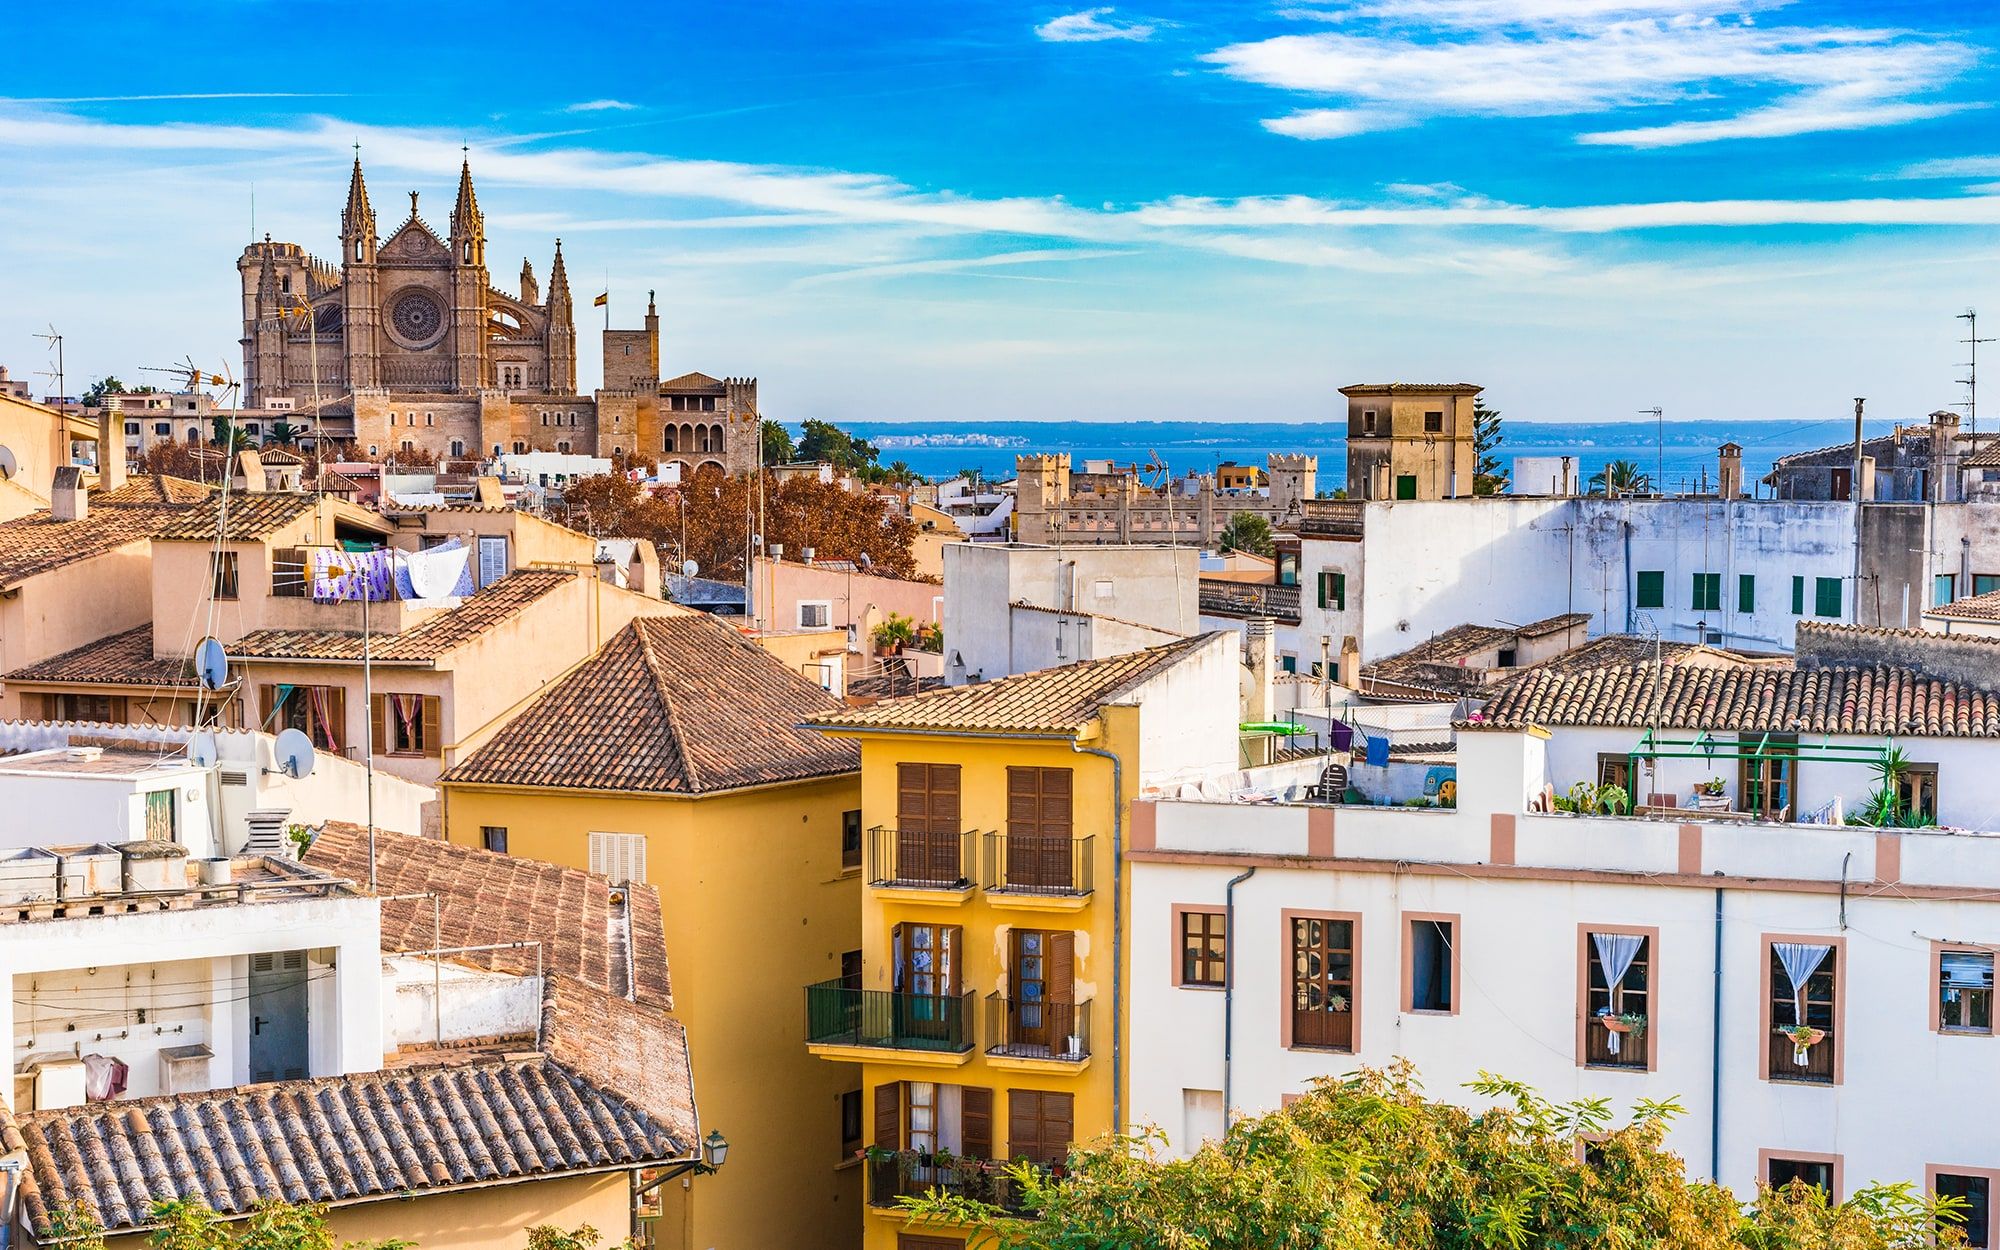 An insider guide to Palma